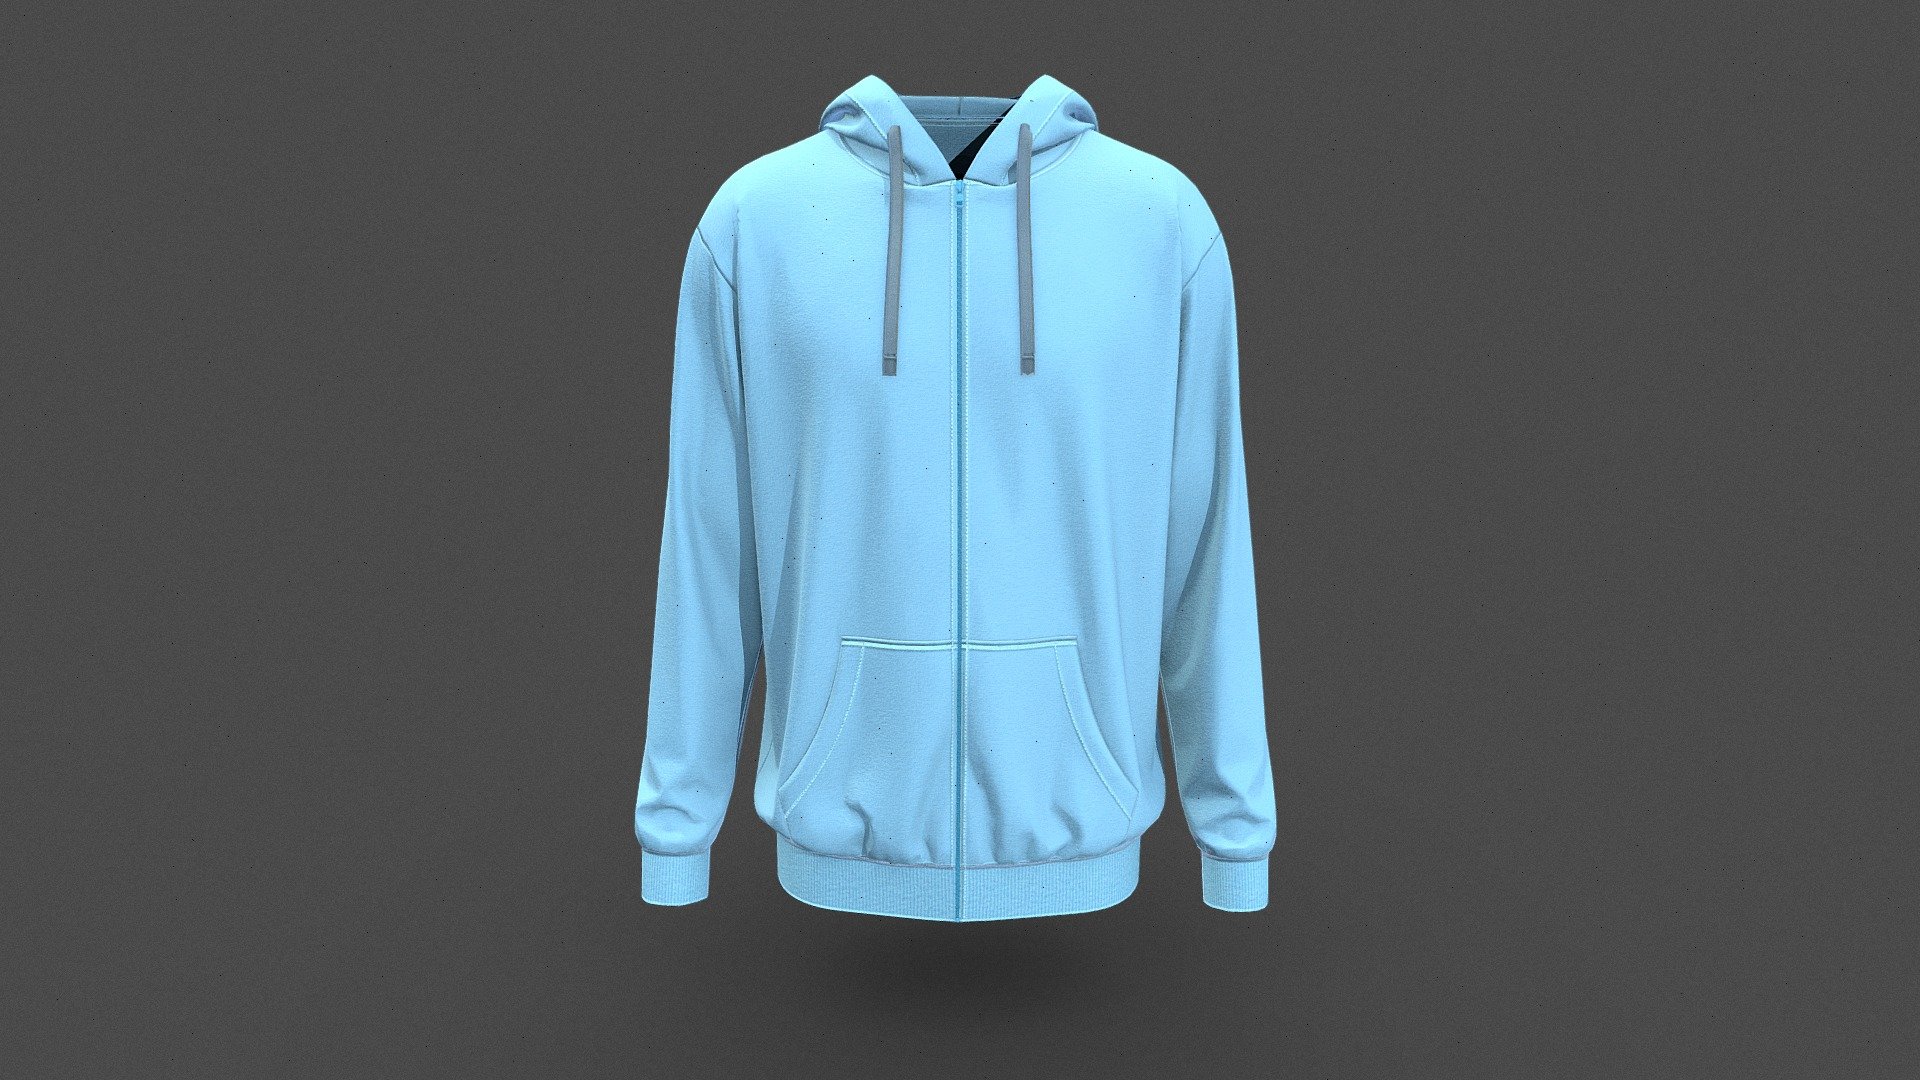 Men Basic Hooded Jacket
Version V1.0

Realistic high detailed Men Classic Hoodie with high resolution textures. Model created by our unique processing &amp; Optimized for 3D web and AR / VR

Features

Optimized &amp; NON-Optimized obj model with 4K texture included




Optimized for AR/VR/MR

4K &amp; 2K fabric texture and print details

Optimized model is 2.55MB

NON-Optimized model is 23.6MB

Knit fabric texture and print details included

GLB file in 2k texture size is 4.06MB

GLB file in 4k texture size is 14.2MB  (Game &amp; Animation Ready)

Suitable for web application configurator development.

Fully unwrap UV

The model has 1 material

Includes high detailed normal map

Unit measurment was inch

Triangular Mesh with 21.8k Vertices

Texture map: Base color, OcclusionRoughnessMetallic(ORM), Normal

Tpose  available on request

For more details or custom order send email: hello@binarycloth.com


Website:binarycloth.com - Men Basic Hooded Jacket - Buy Royalty Free 3D model by BINARYCLOTH (@binaryclothofficial) 3d model